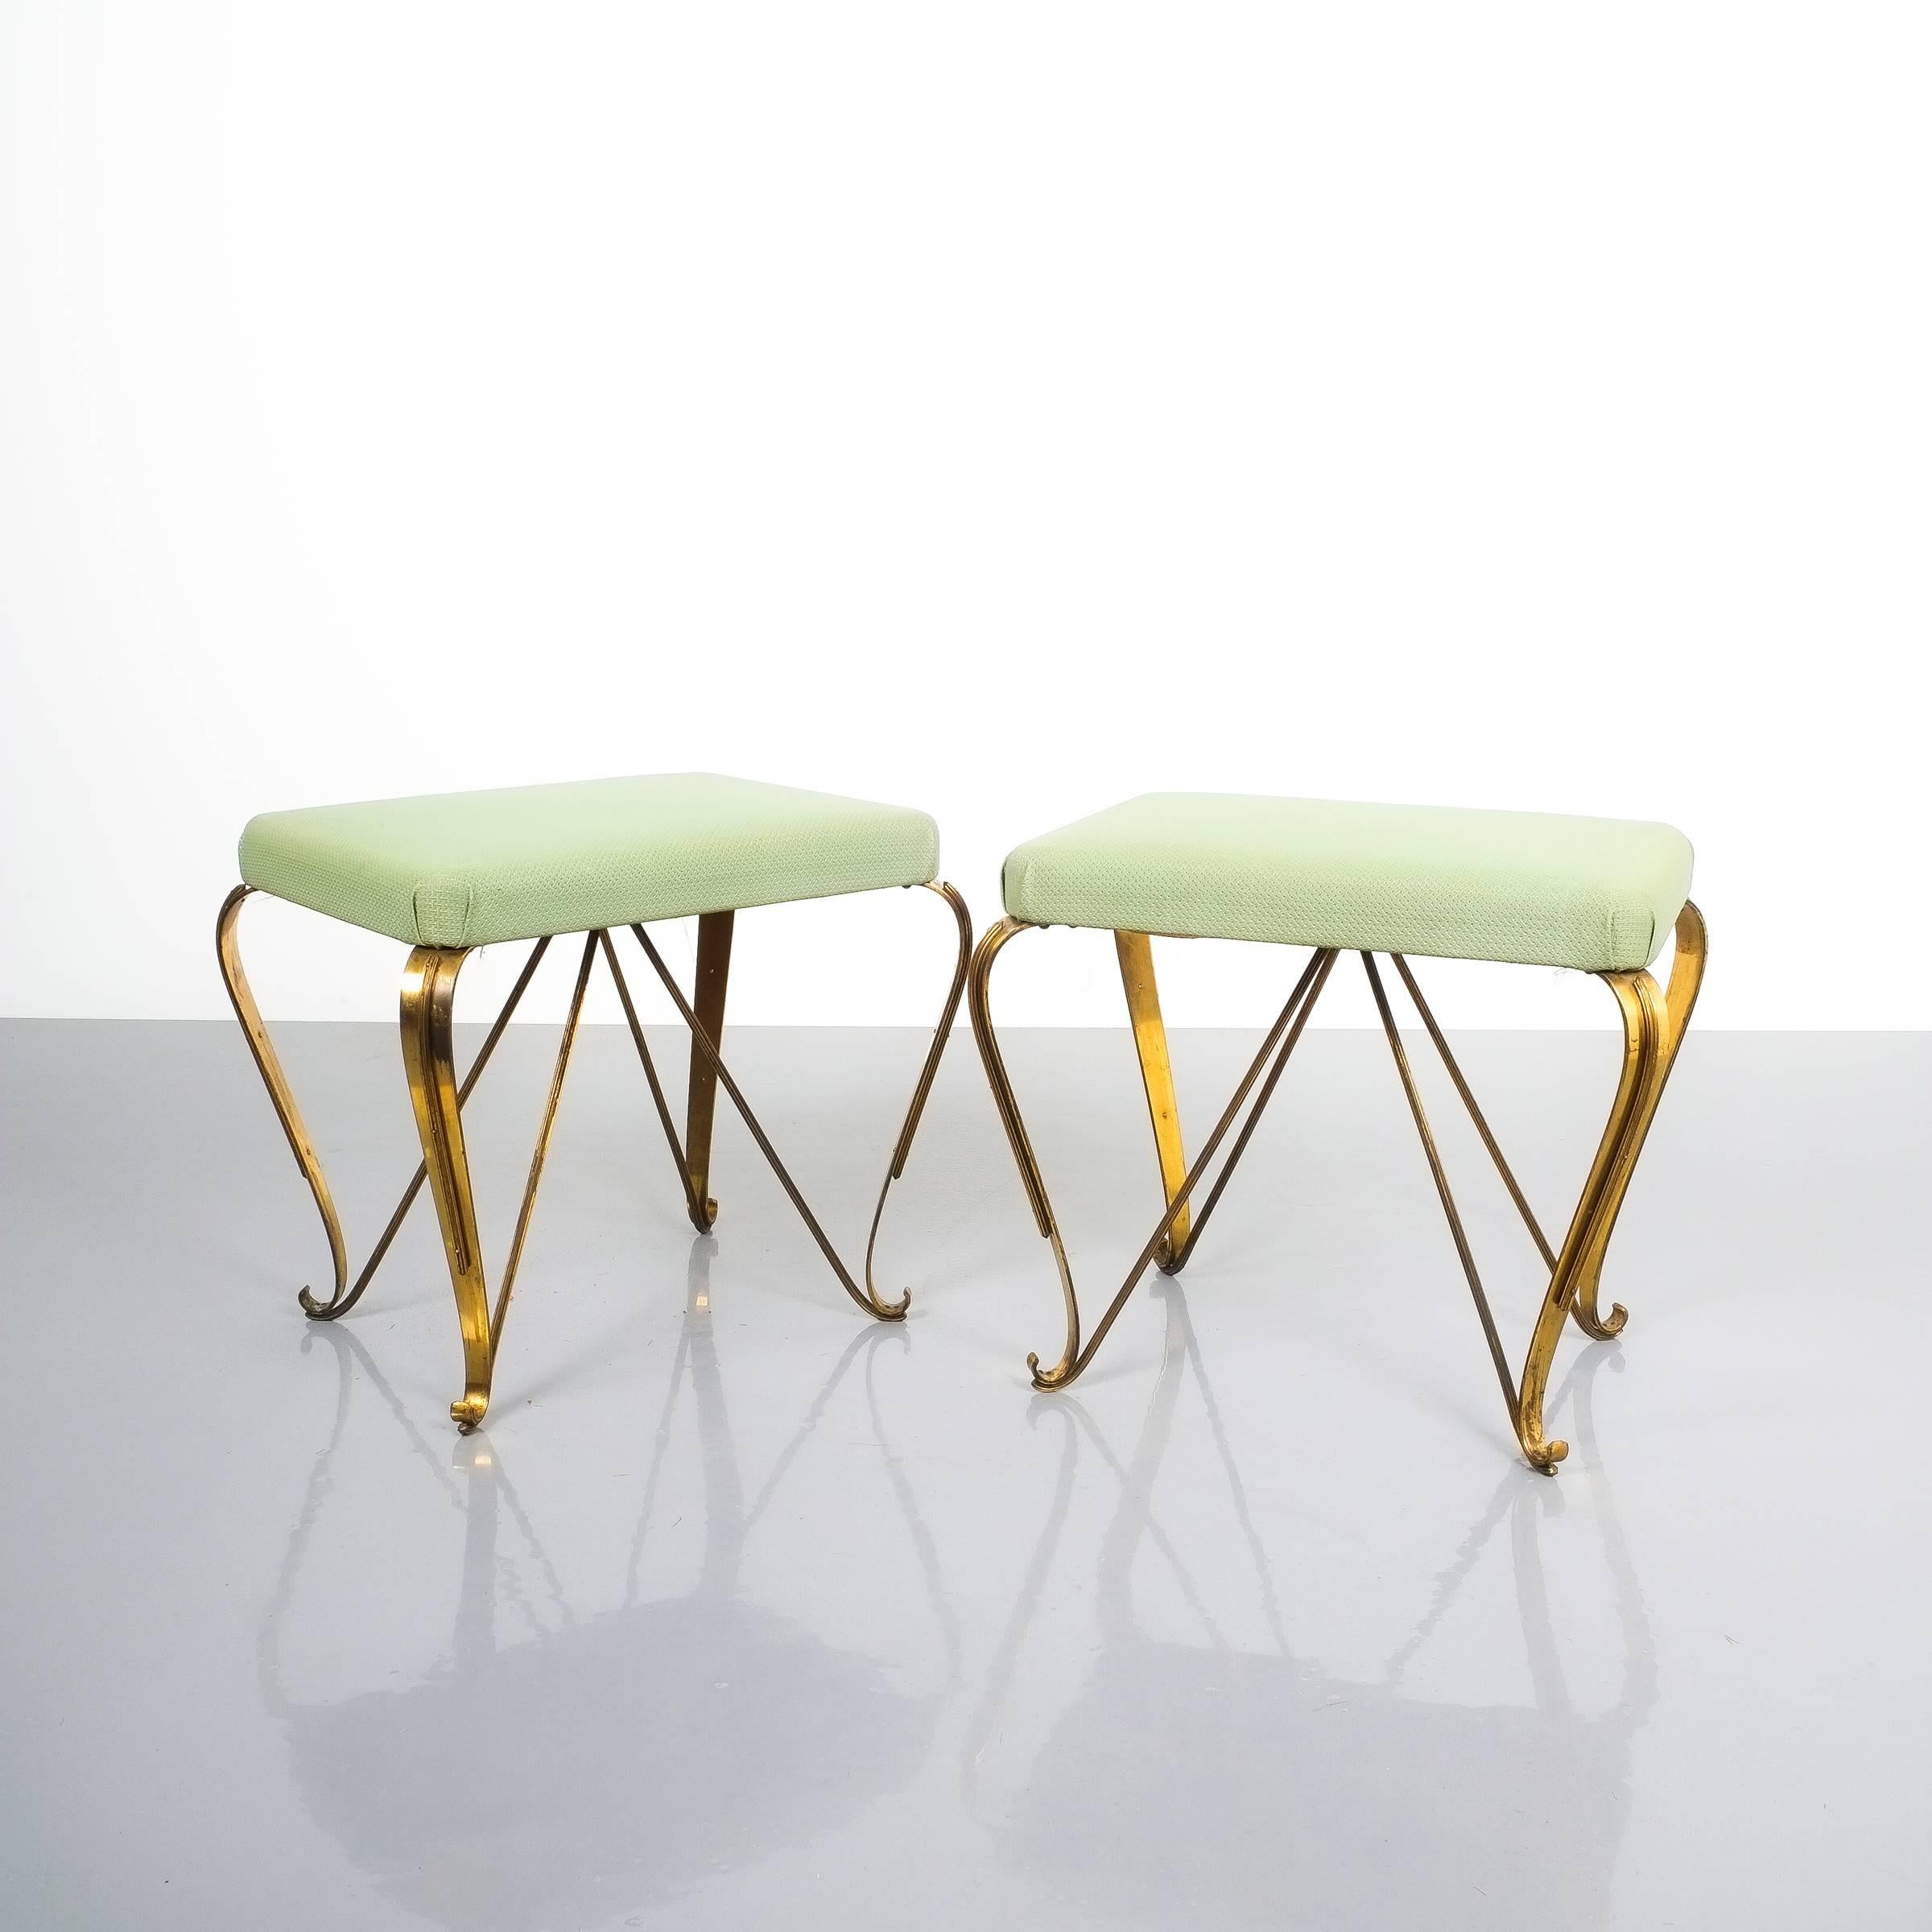 Pair of midcentury gold brass stools, Italy, 1950. Nice pair of brass stools with original vinyl upholstery in good condition.